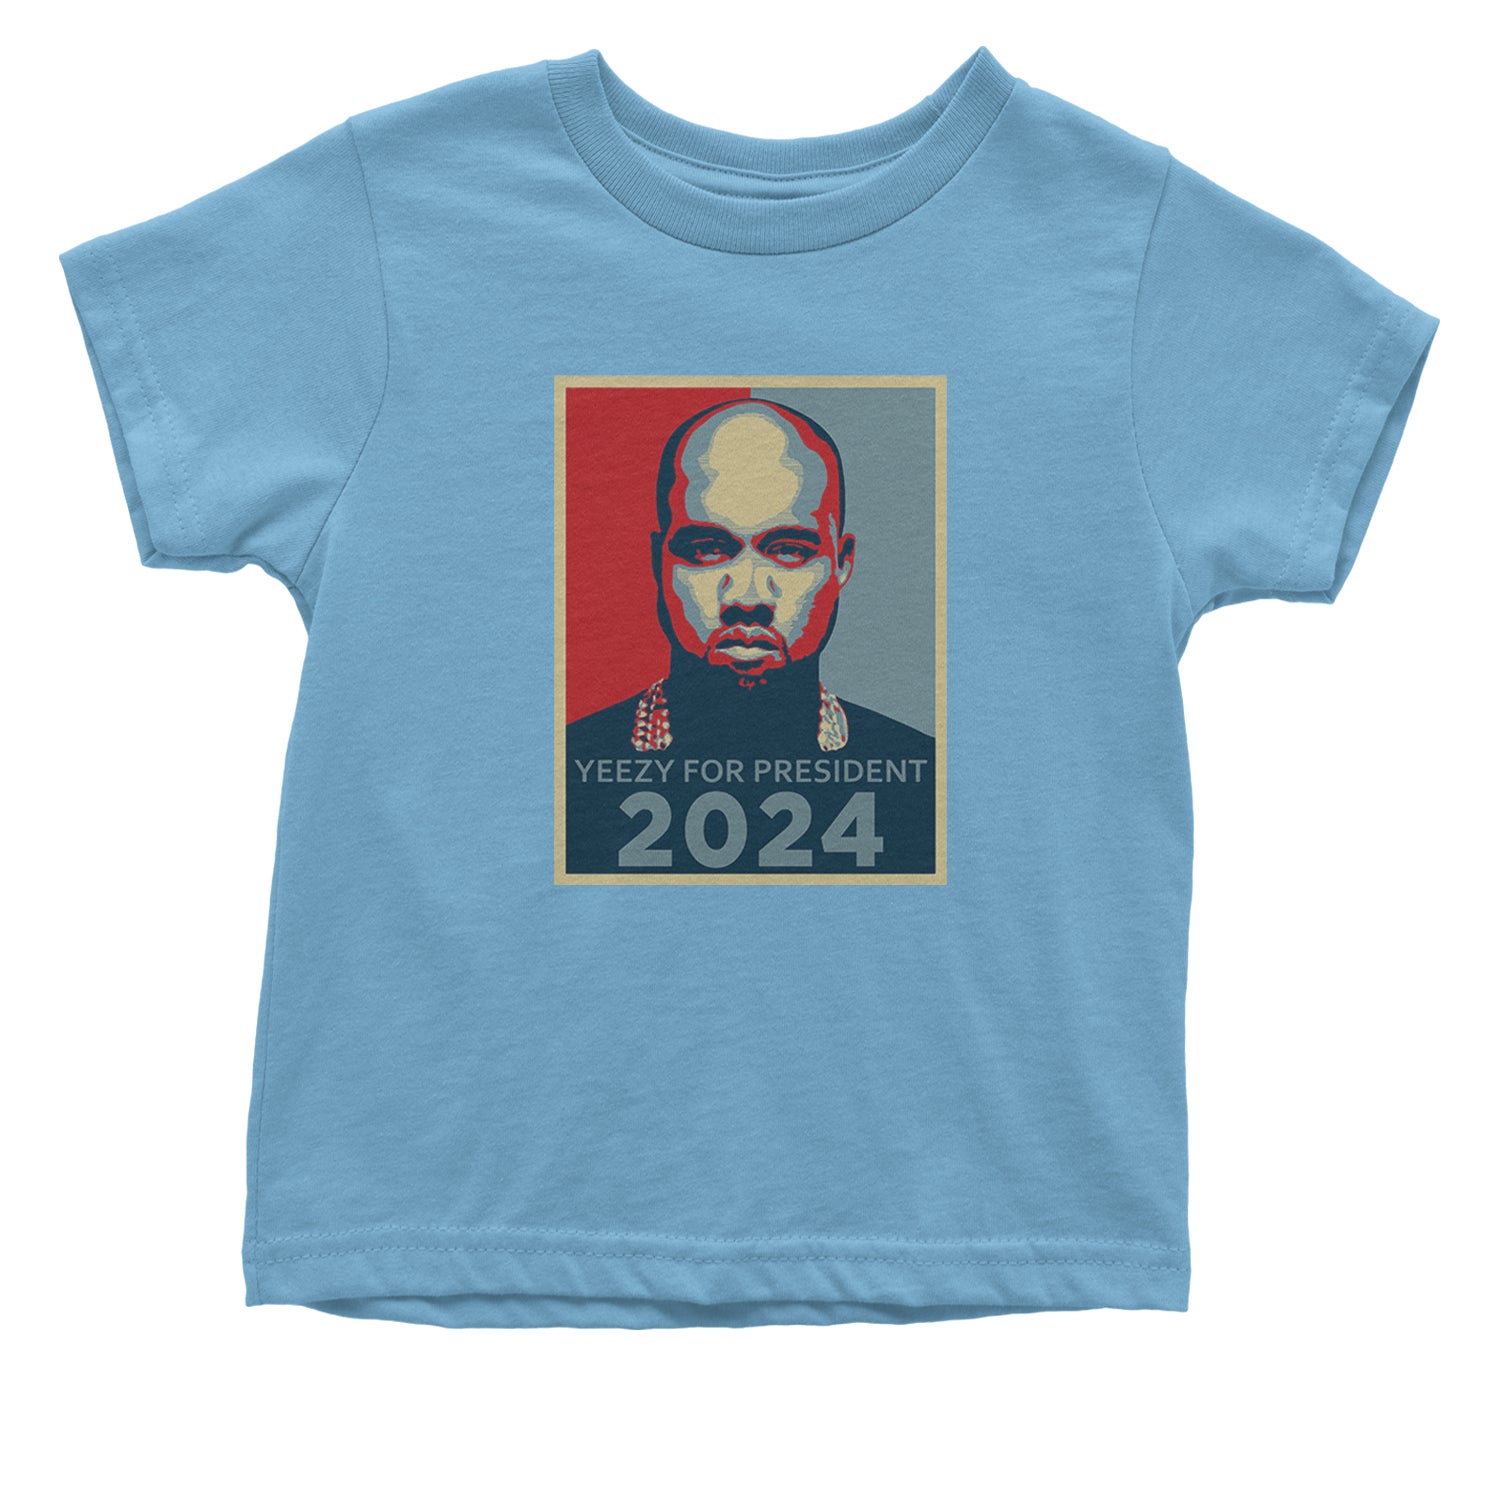 Yeezus For President Vote for Ye Infant One-Piece Romper Bodysuit and Toddler T-shirt Light Blue